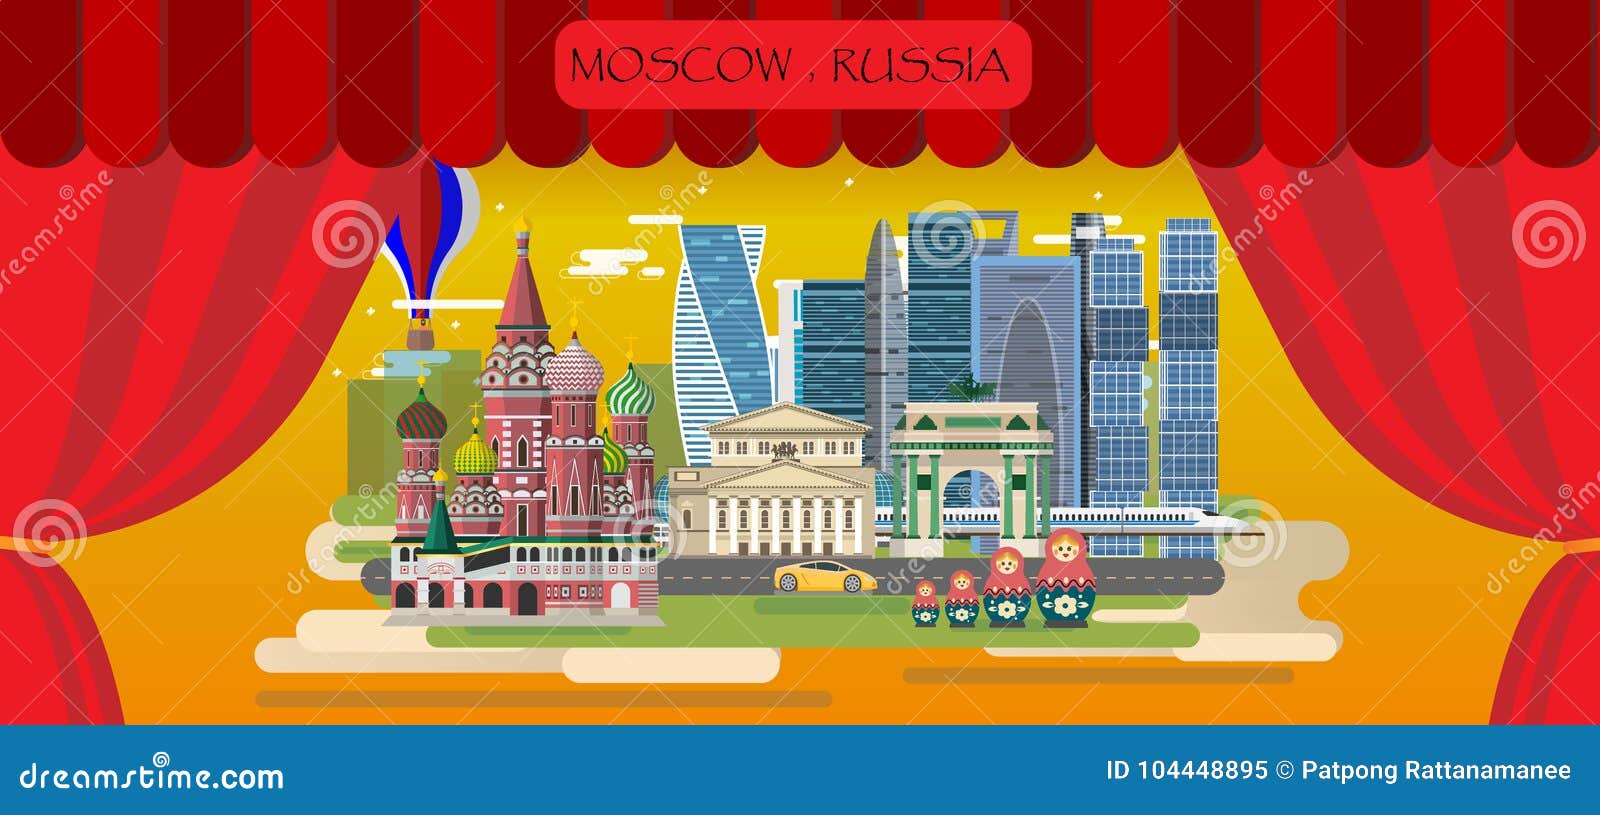 presentation about moscow